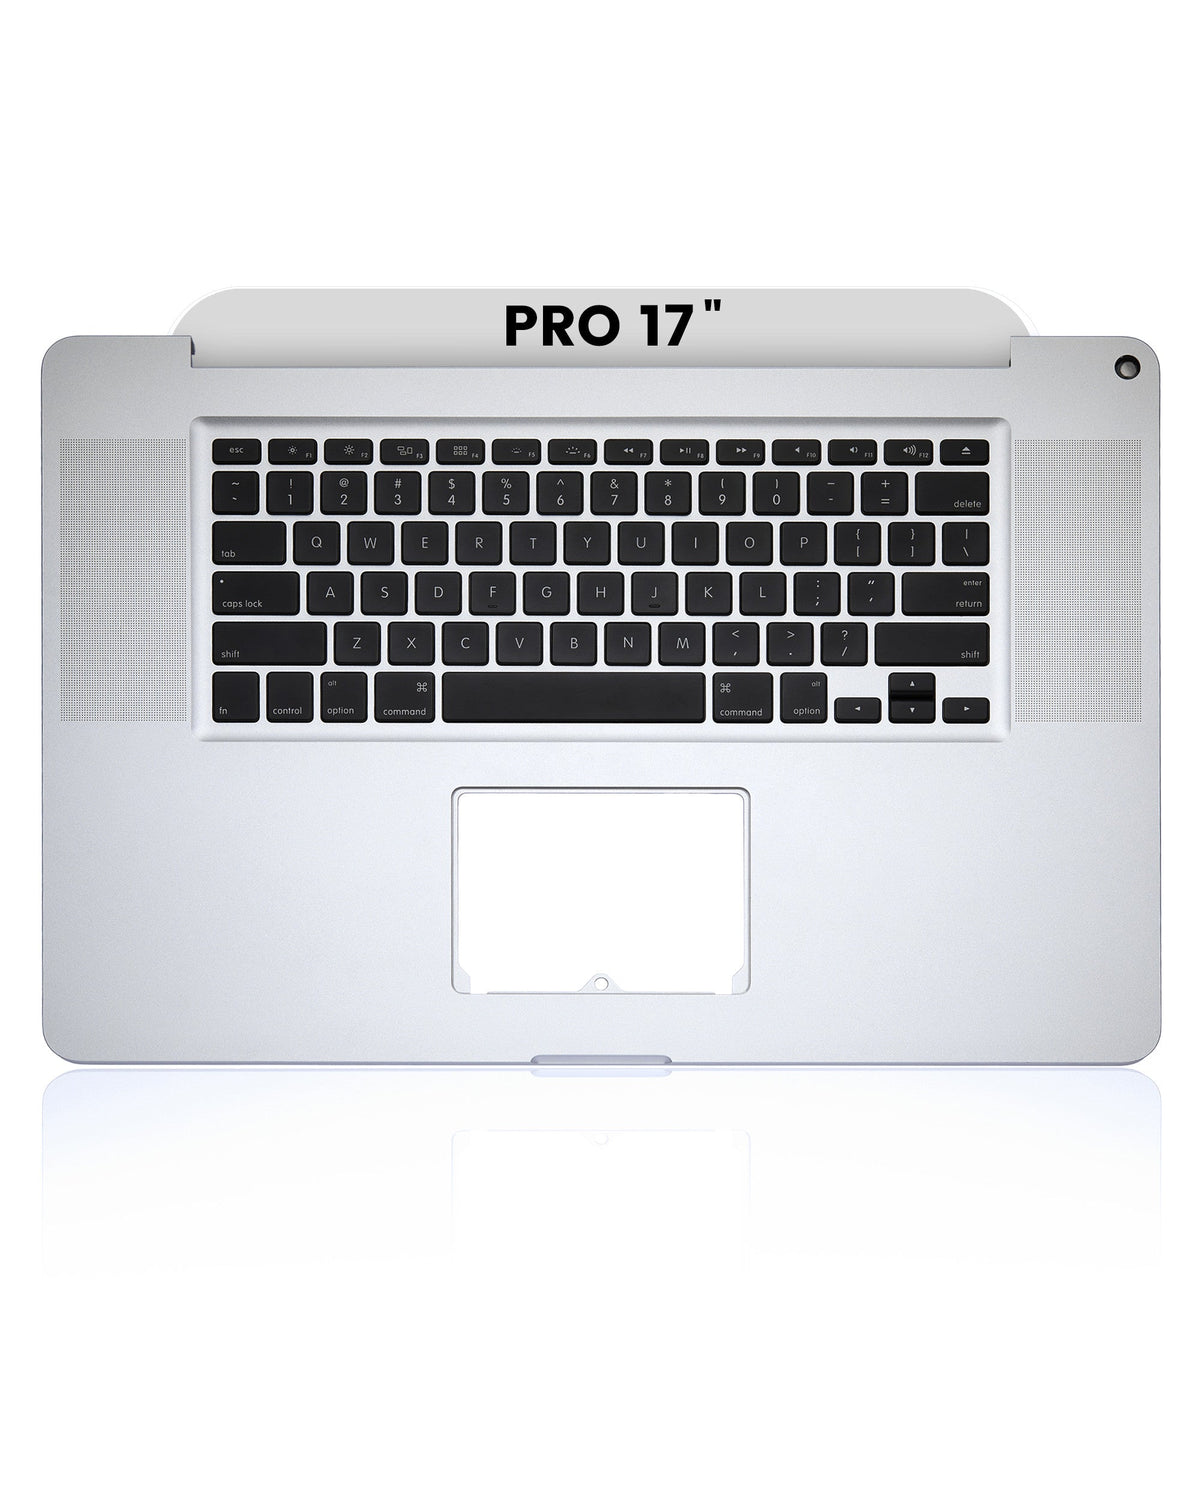 TOP CASE AND KEYBOARD (US ENGLISH) FOR MACBOOK PRO UNIBODY 17" A1297  (EARLY 2009 / MID 2009)